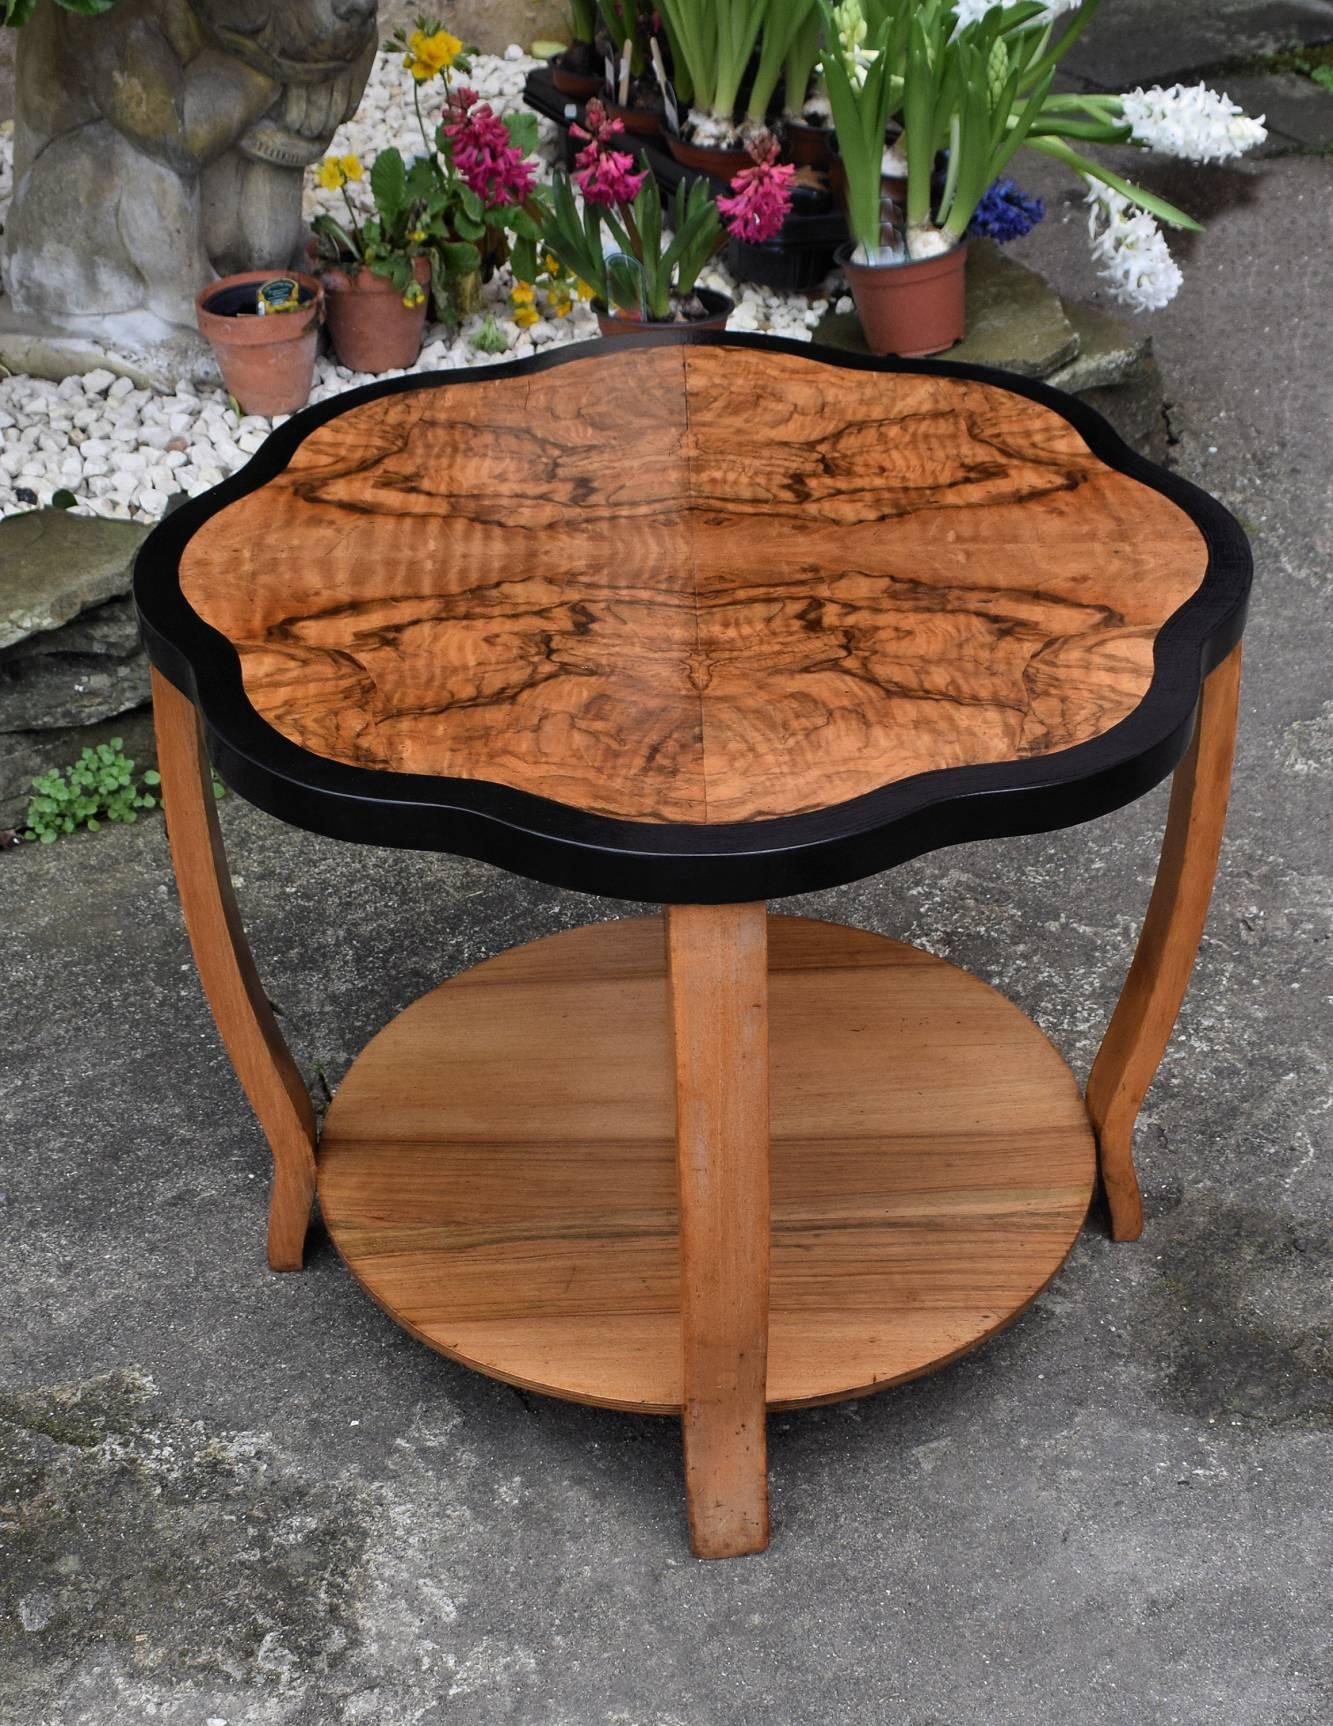 This is a stunning looking table with superb Deco design and shape. Ideal size for modern day use and a easily integrated for most rooms. Light tone highly figured walnut veneers, with ebonised edging beautifully shows off the scalloped top. We've